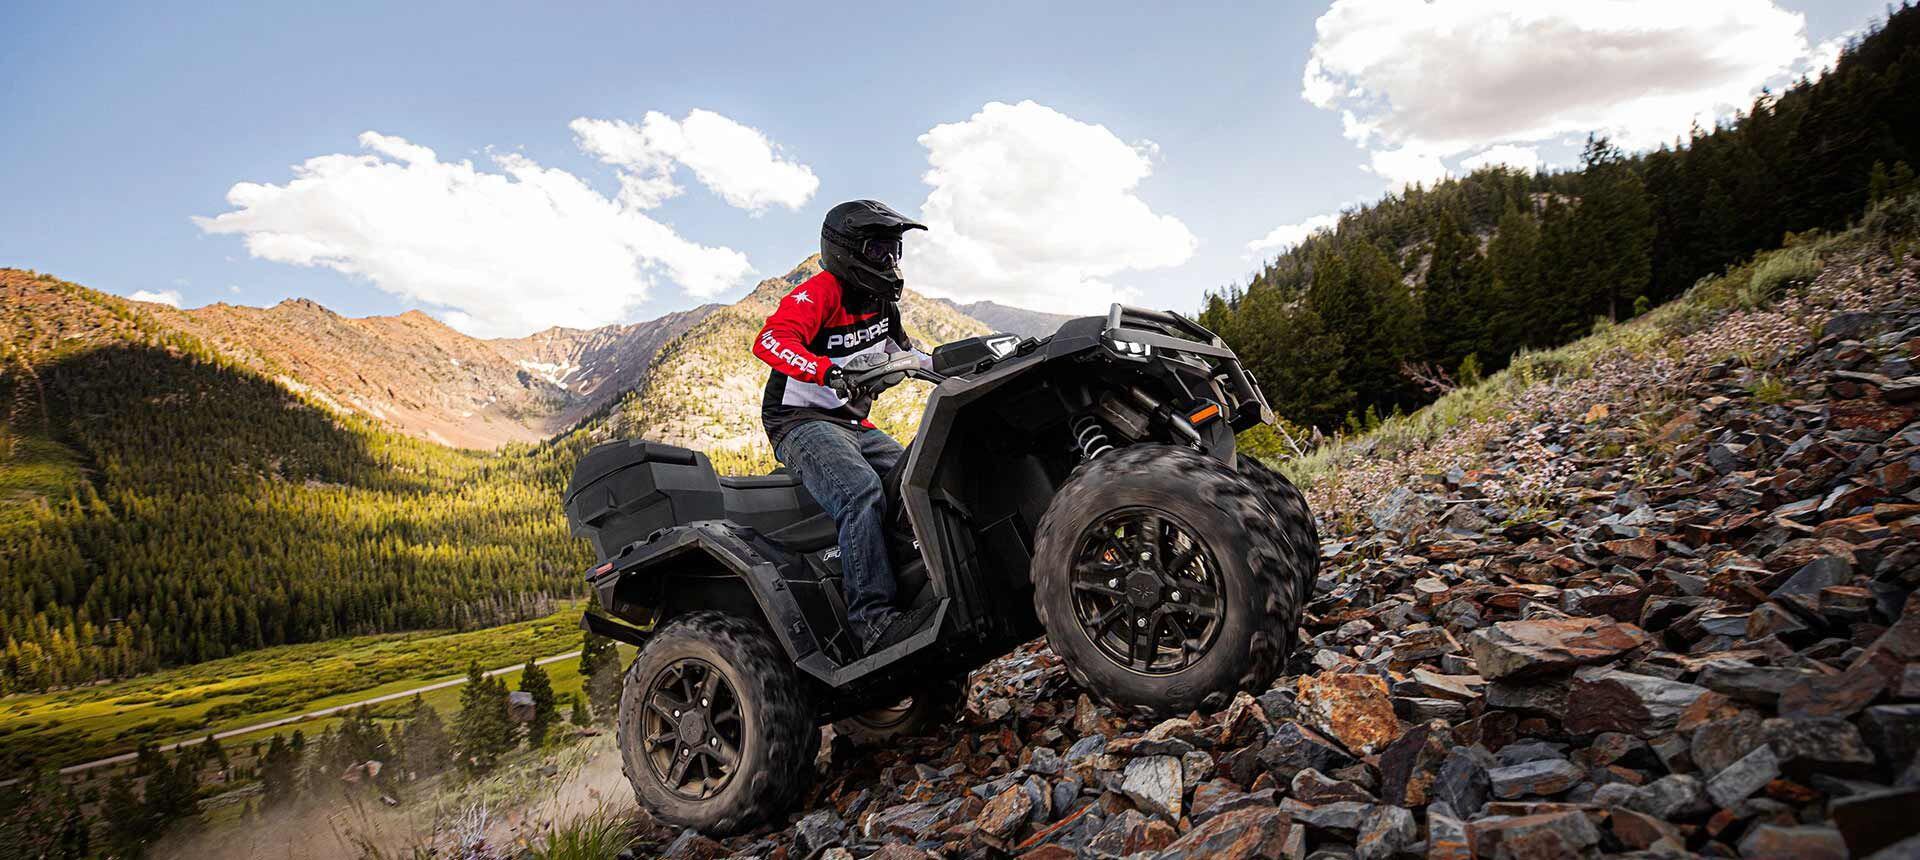 Polaris’ system is more of an all-wheel-drive style.